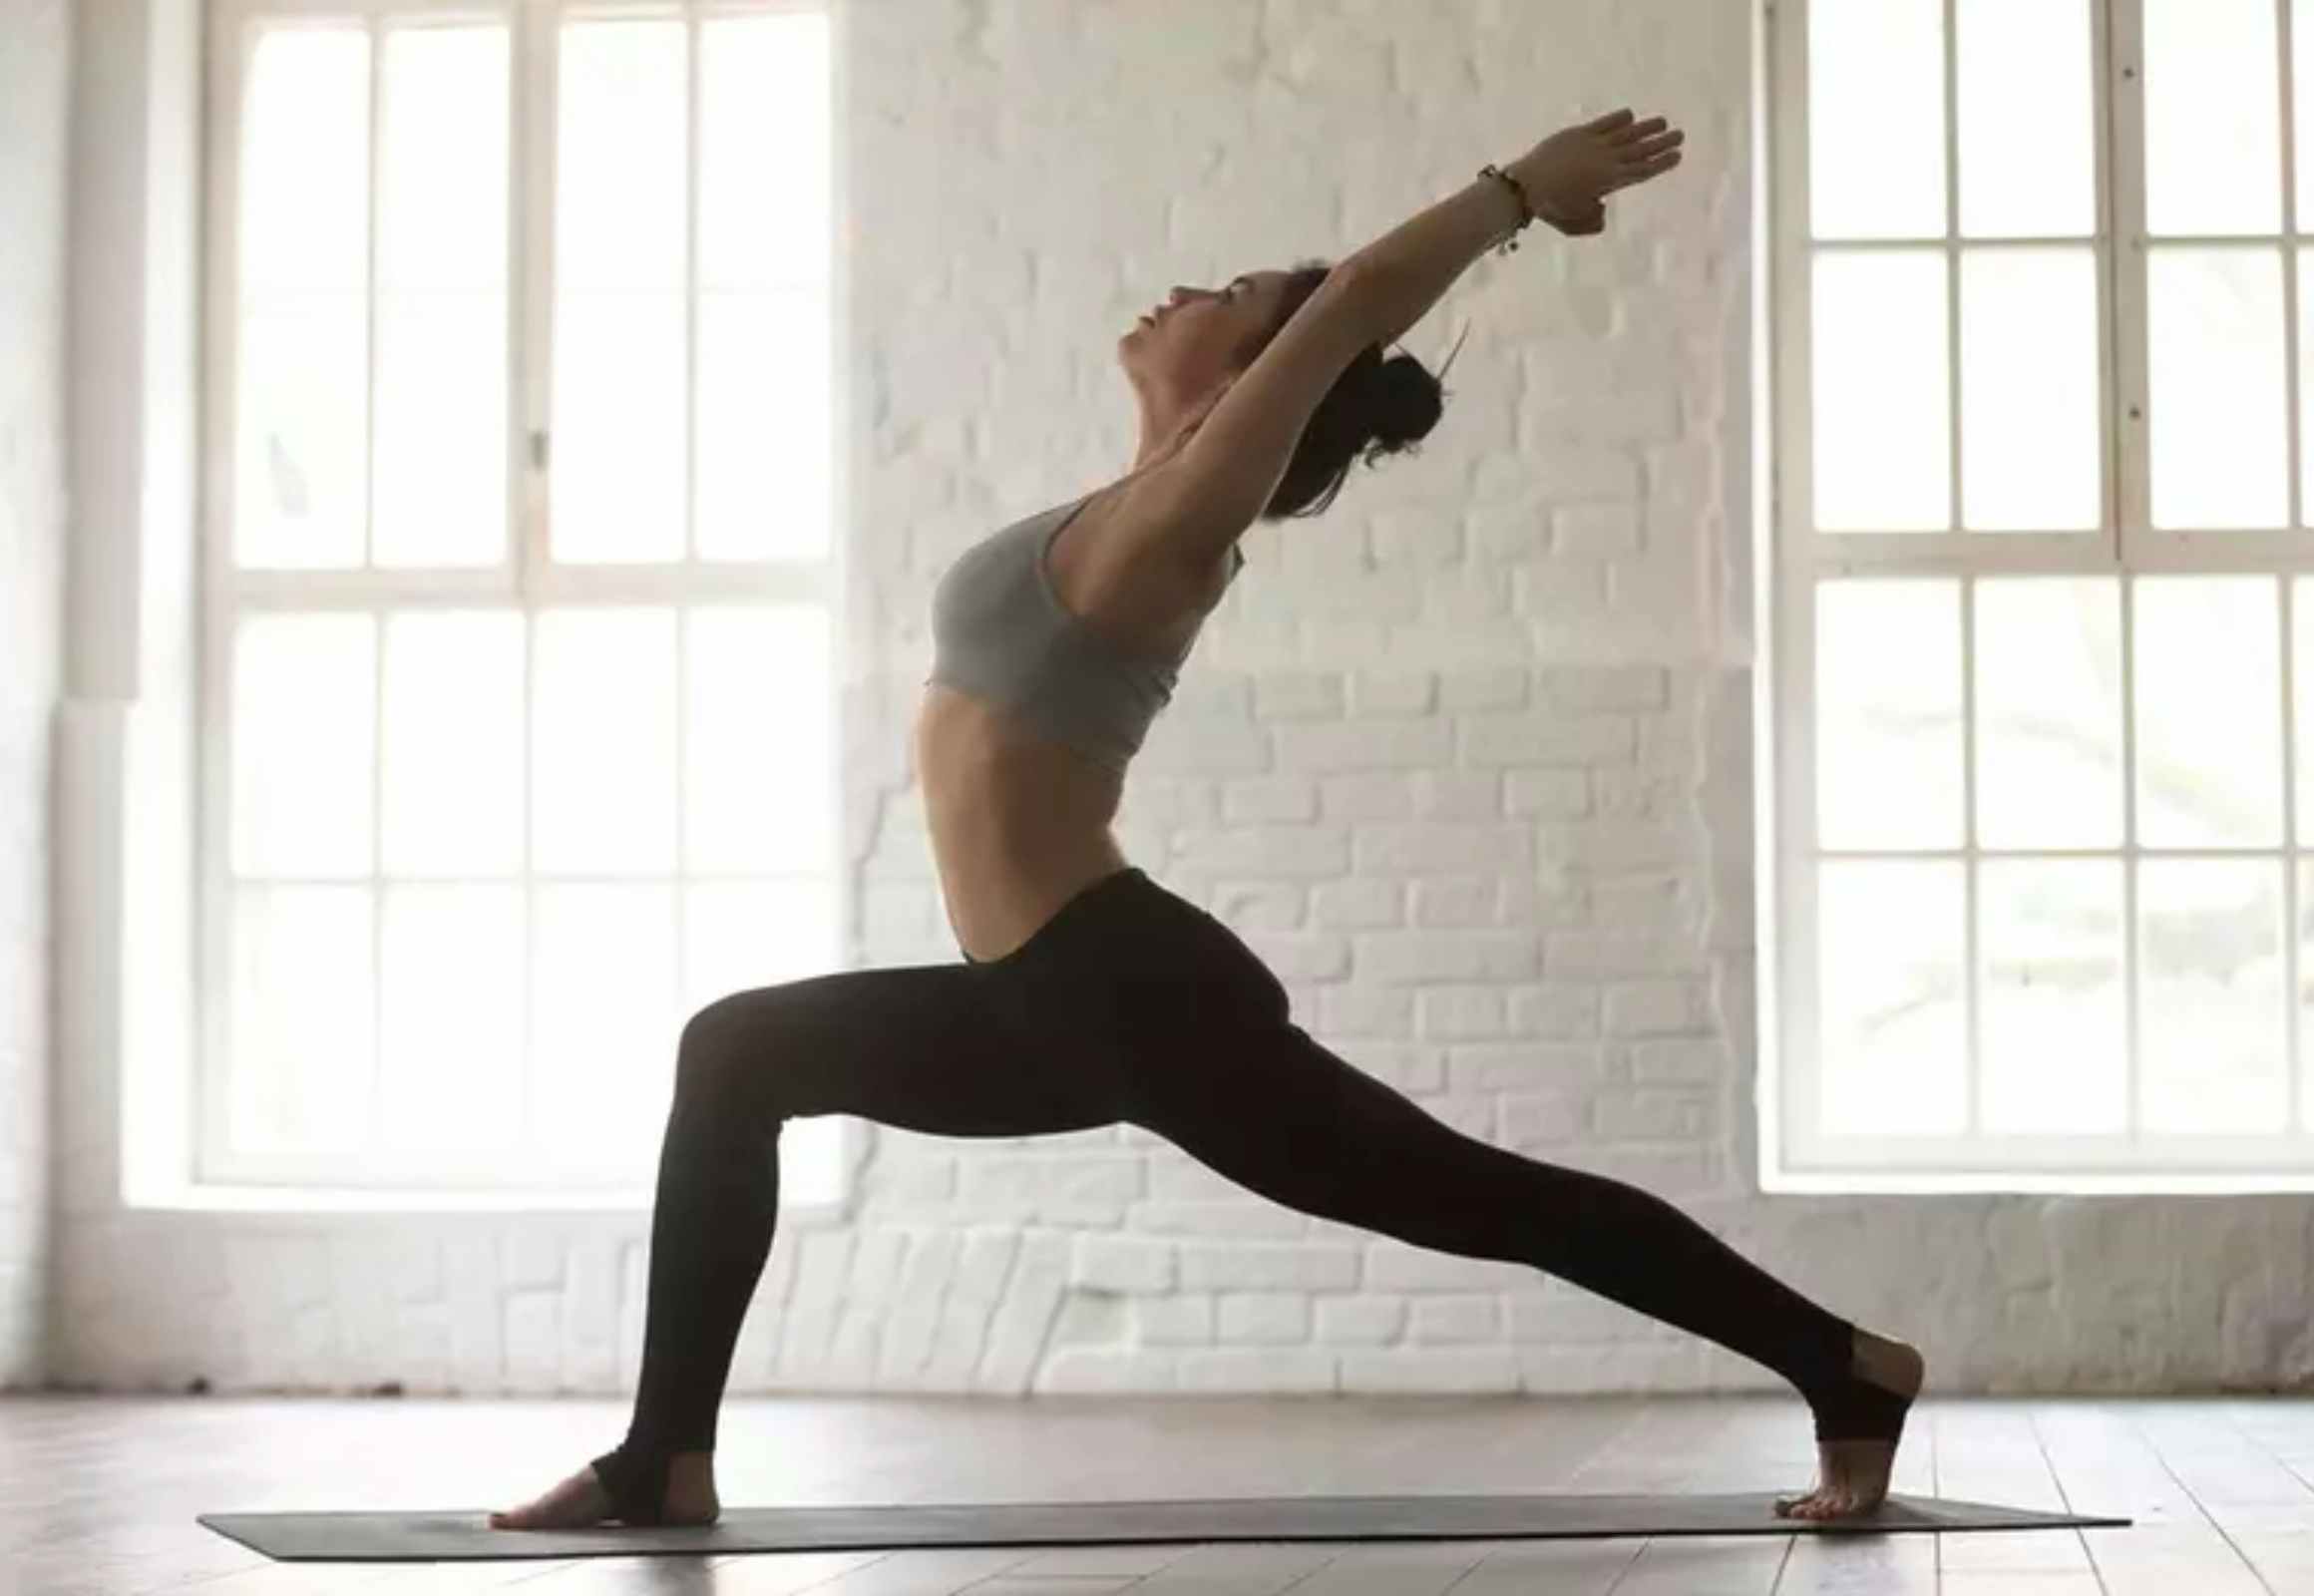 The Yoga Collective: $13 for 1 Year of Unlimited Classes, $4 for 3 Months